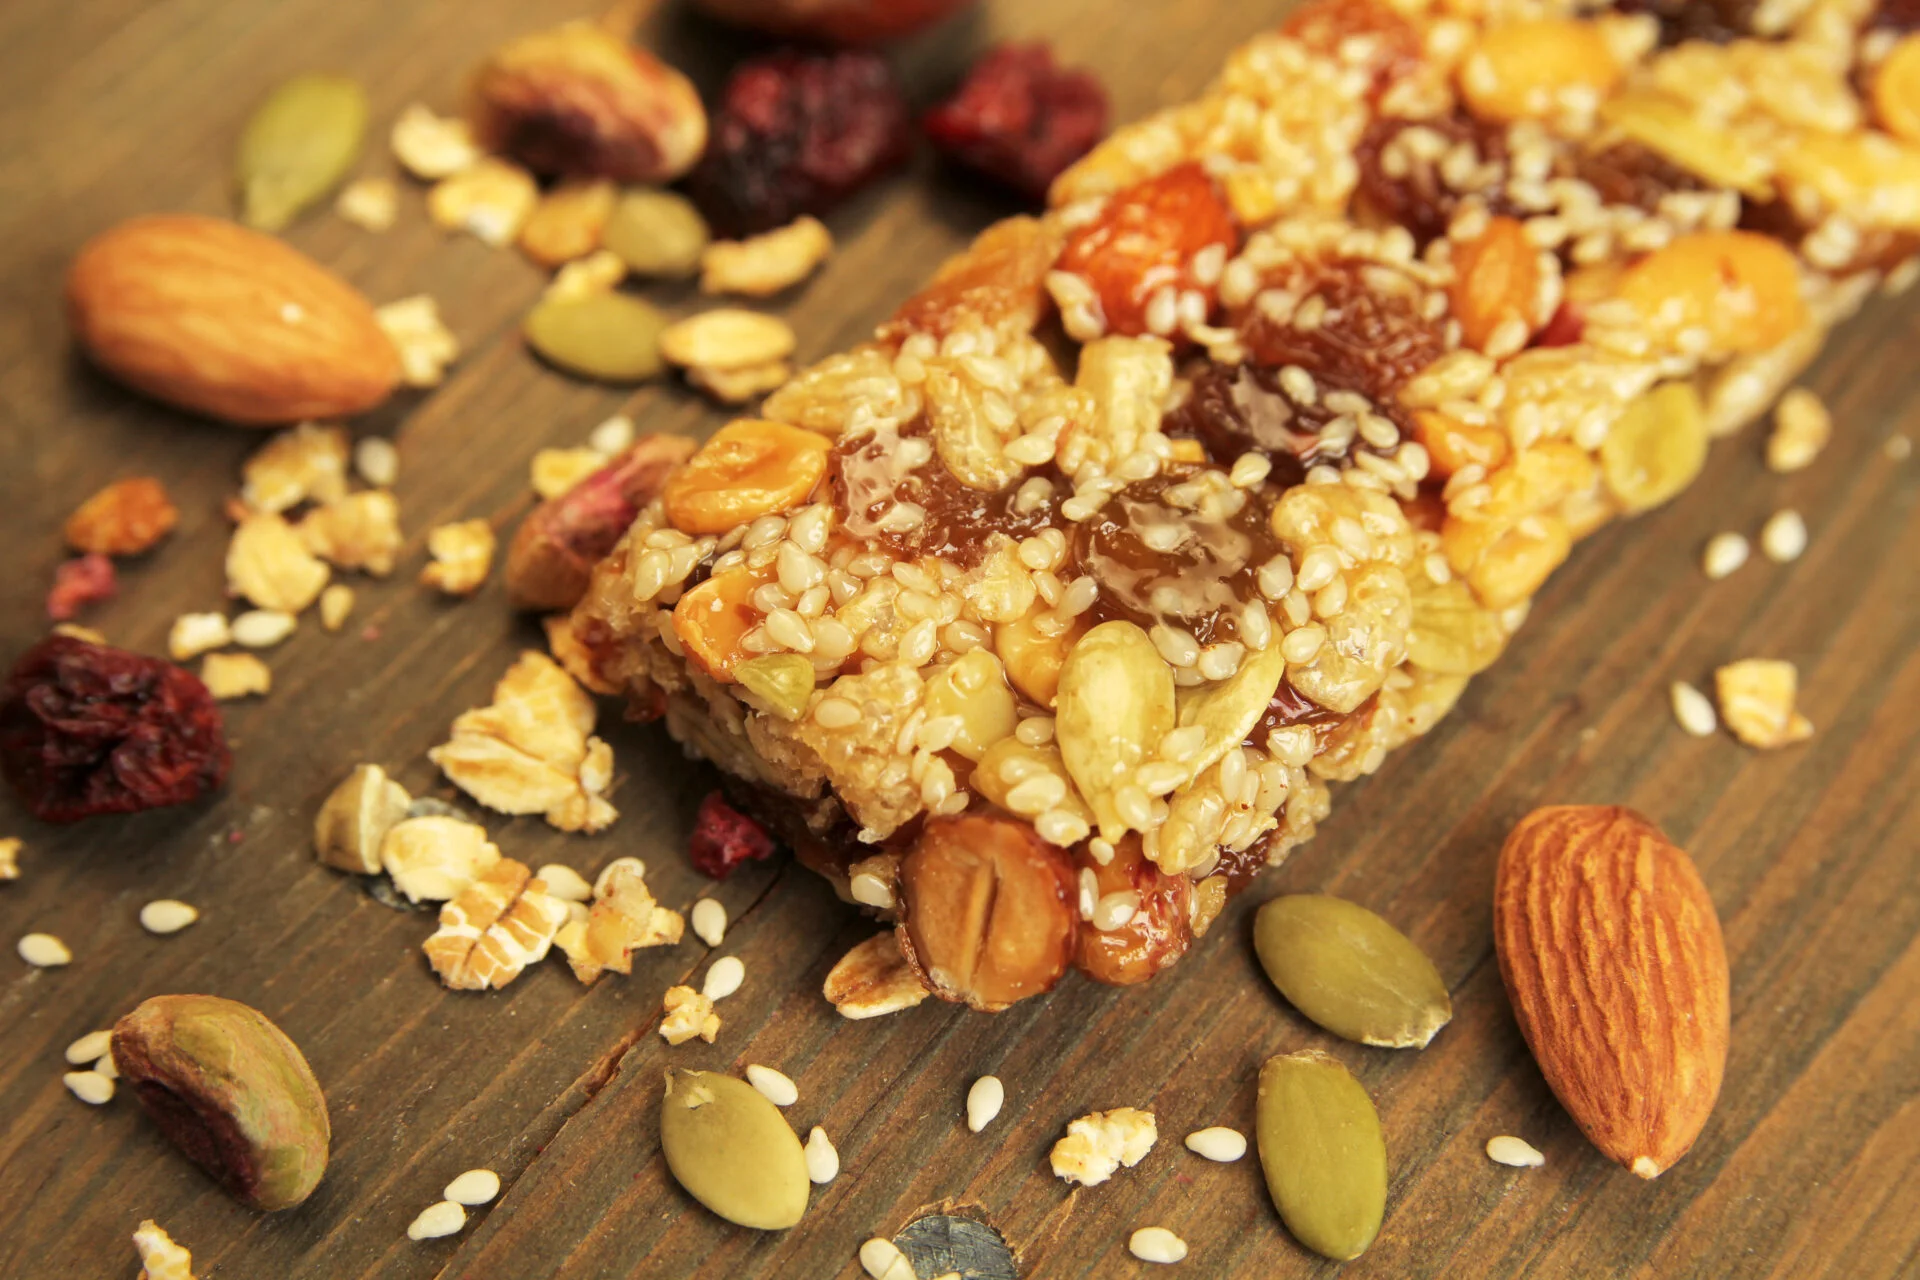 Organic granola bar with nuts and dry fruits on a wooden table